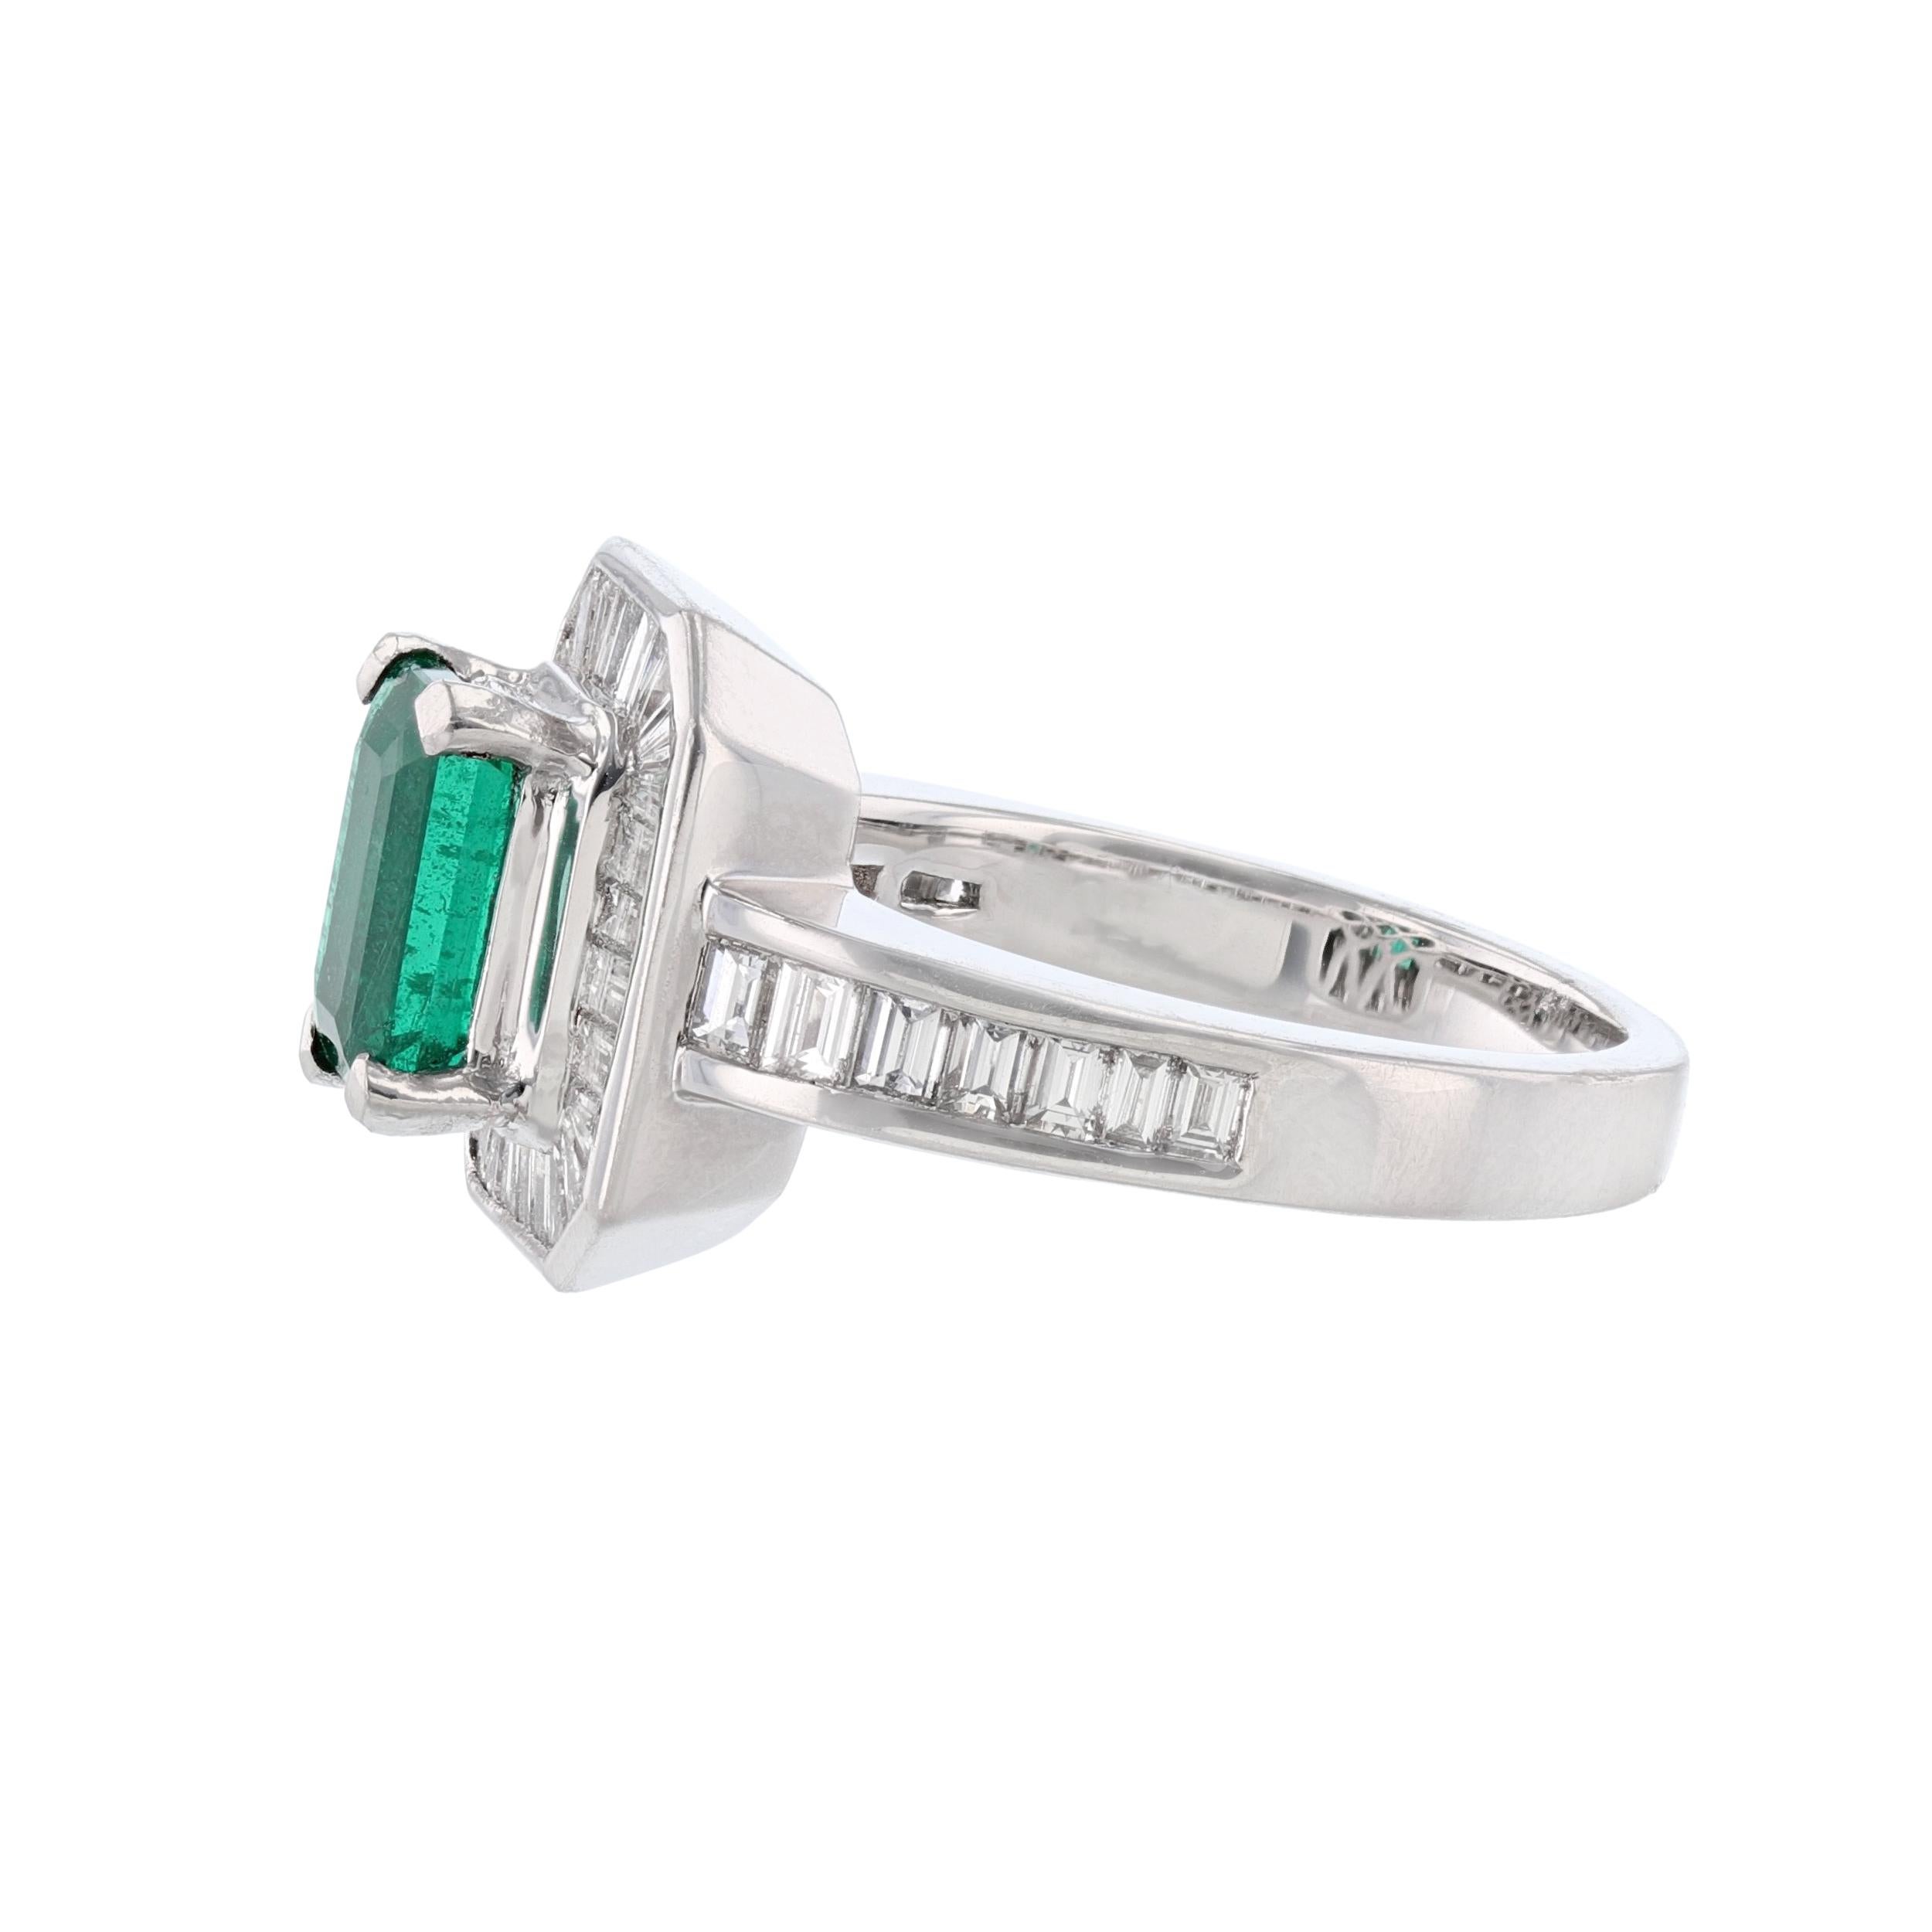 This ring is made in platinum and features an emerald cut, GIA certified emerald as the middle stone weighing 1.55 carats. The GIA certificate number is 2125281009. The ring also features 43 channel set, baguette cut diamonds weighing 1.23 carats.